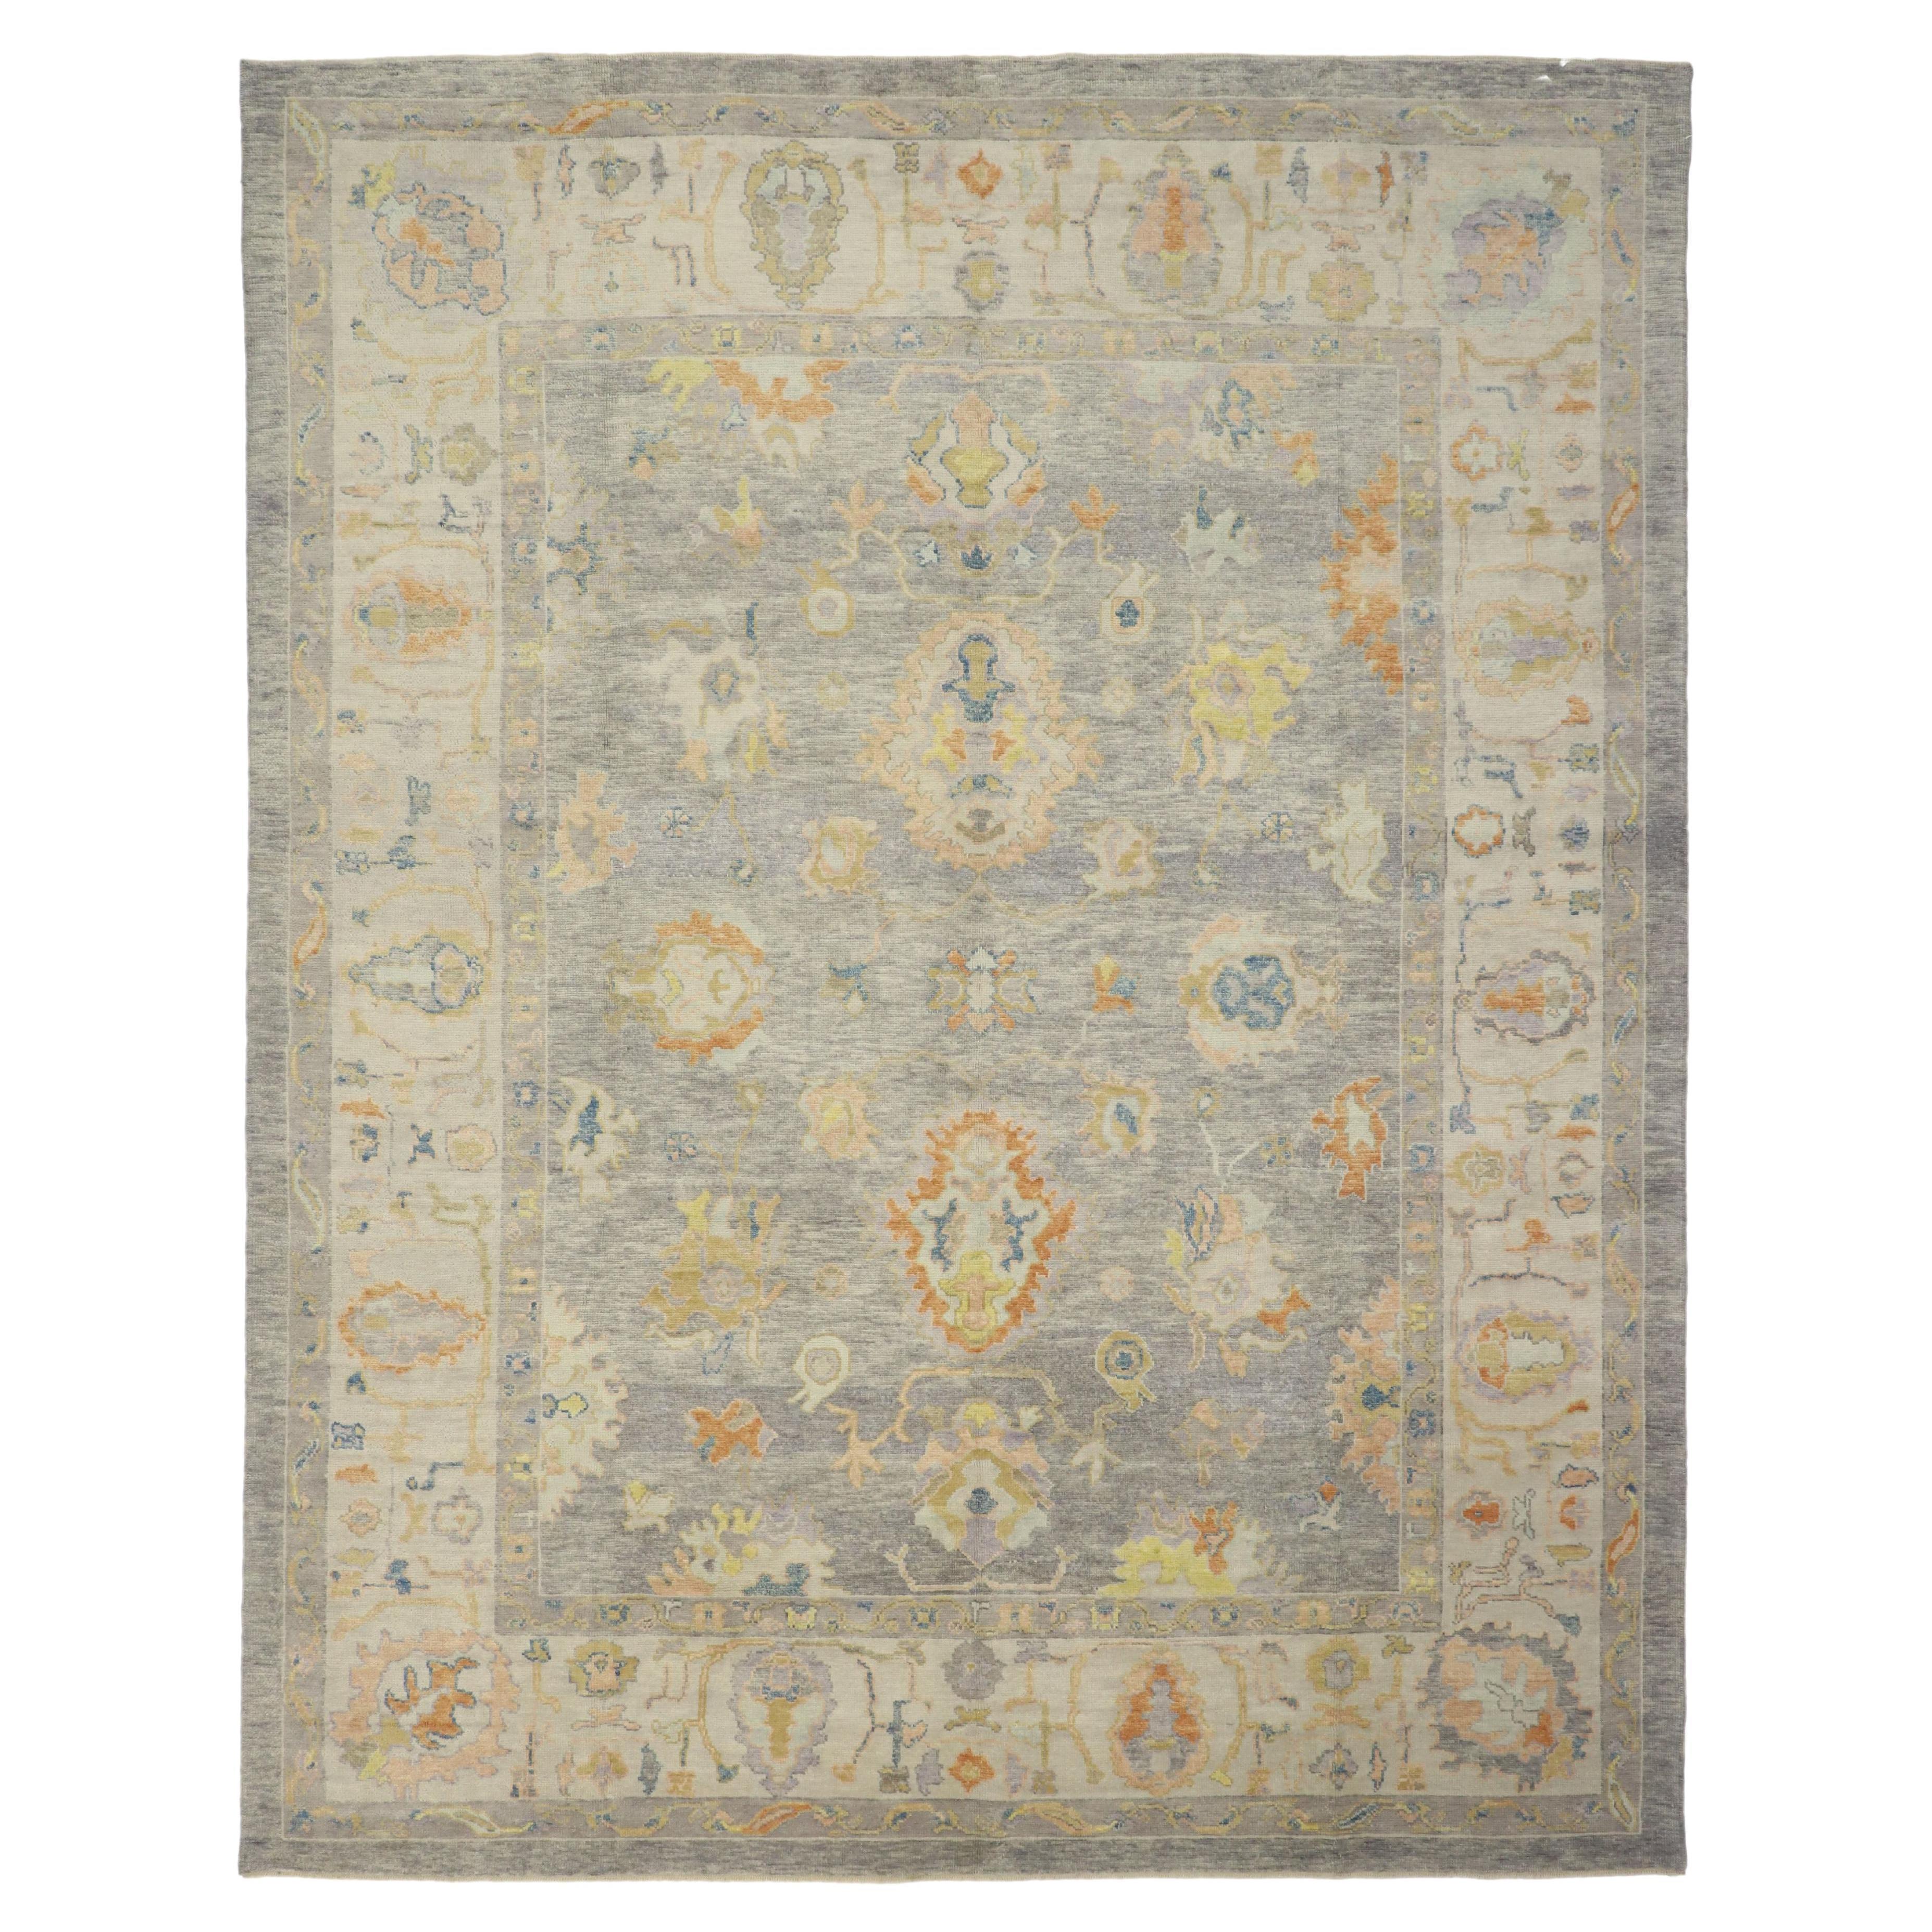 Contemporary Gray Oushak Rug, Quiet Sophistication Meets Tranquil Serenity